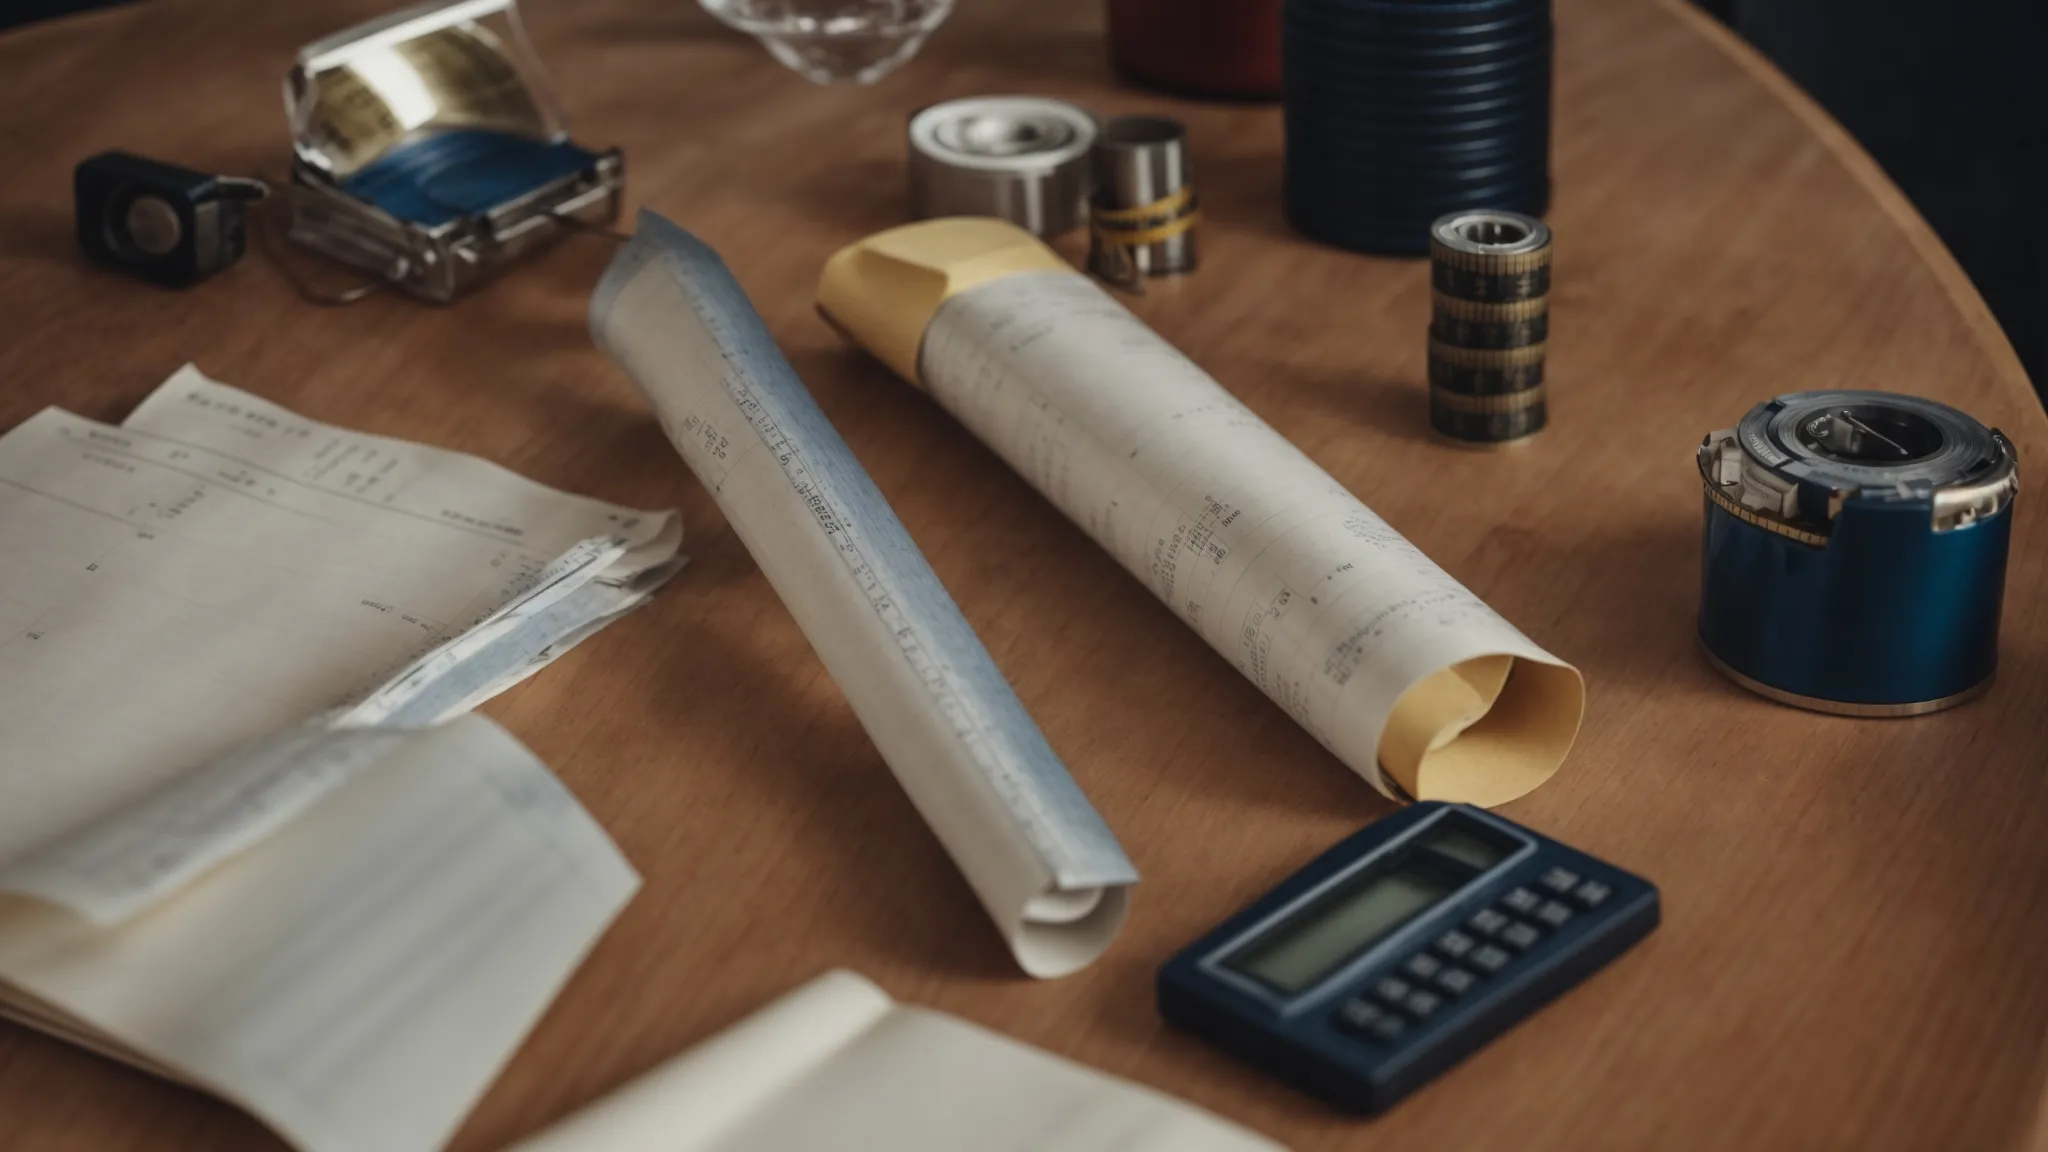 a rolled-up blueprint sitting beside a calculator and a piggy bank on a polished wooden table, with a tape measure partially unfurled next to them.